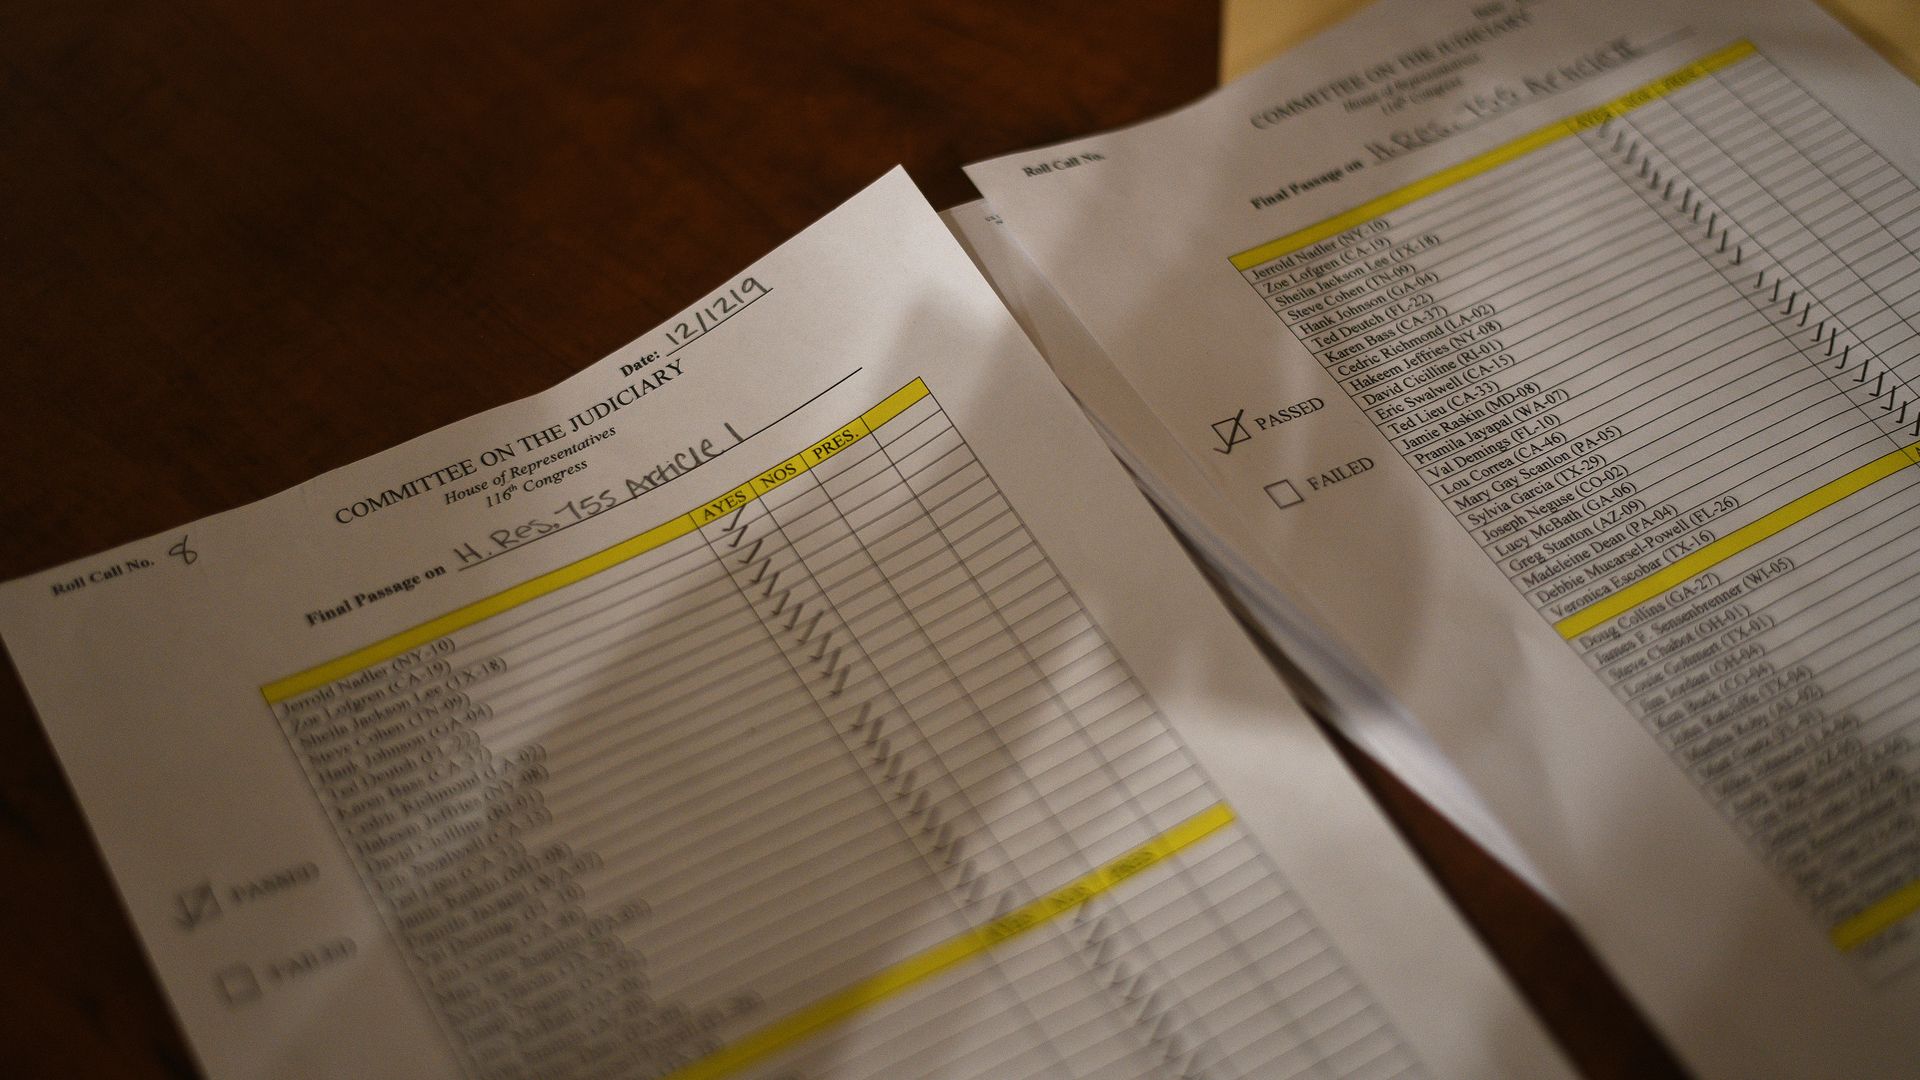 A photo of the paperwork documenting the House Judiciary Committee member vote